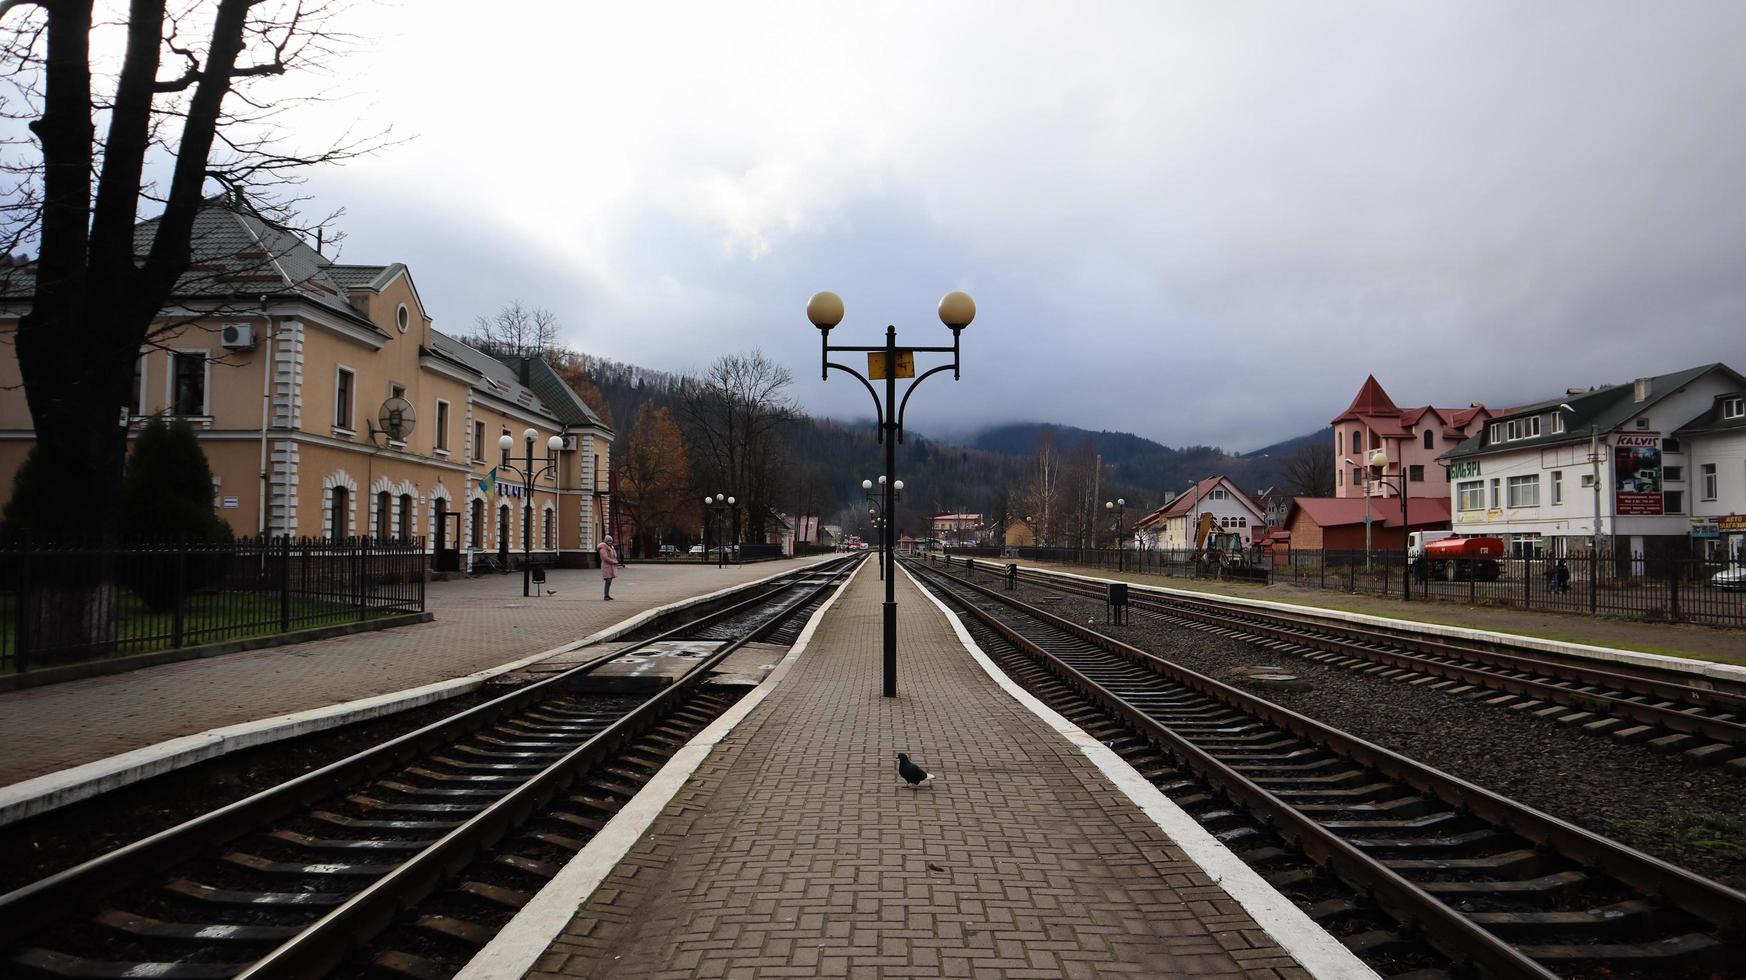 Ukraine, Yaremcha - November 20, 2019. the railway station of the village of Yaremche in the Carpathians. Old train station on an early cloudy morning. beautiful scenery in the mountains. photo